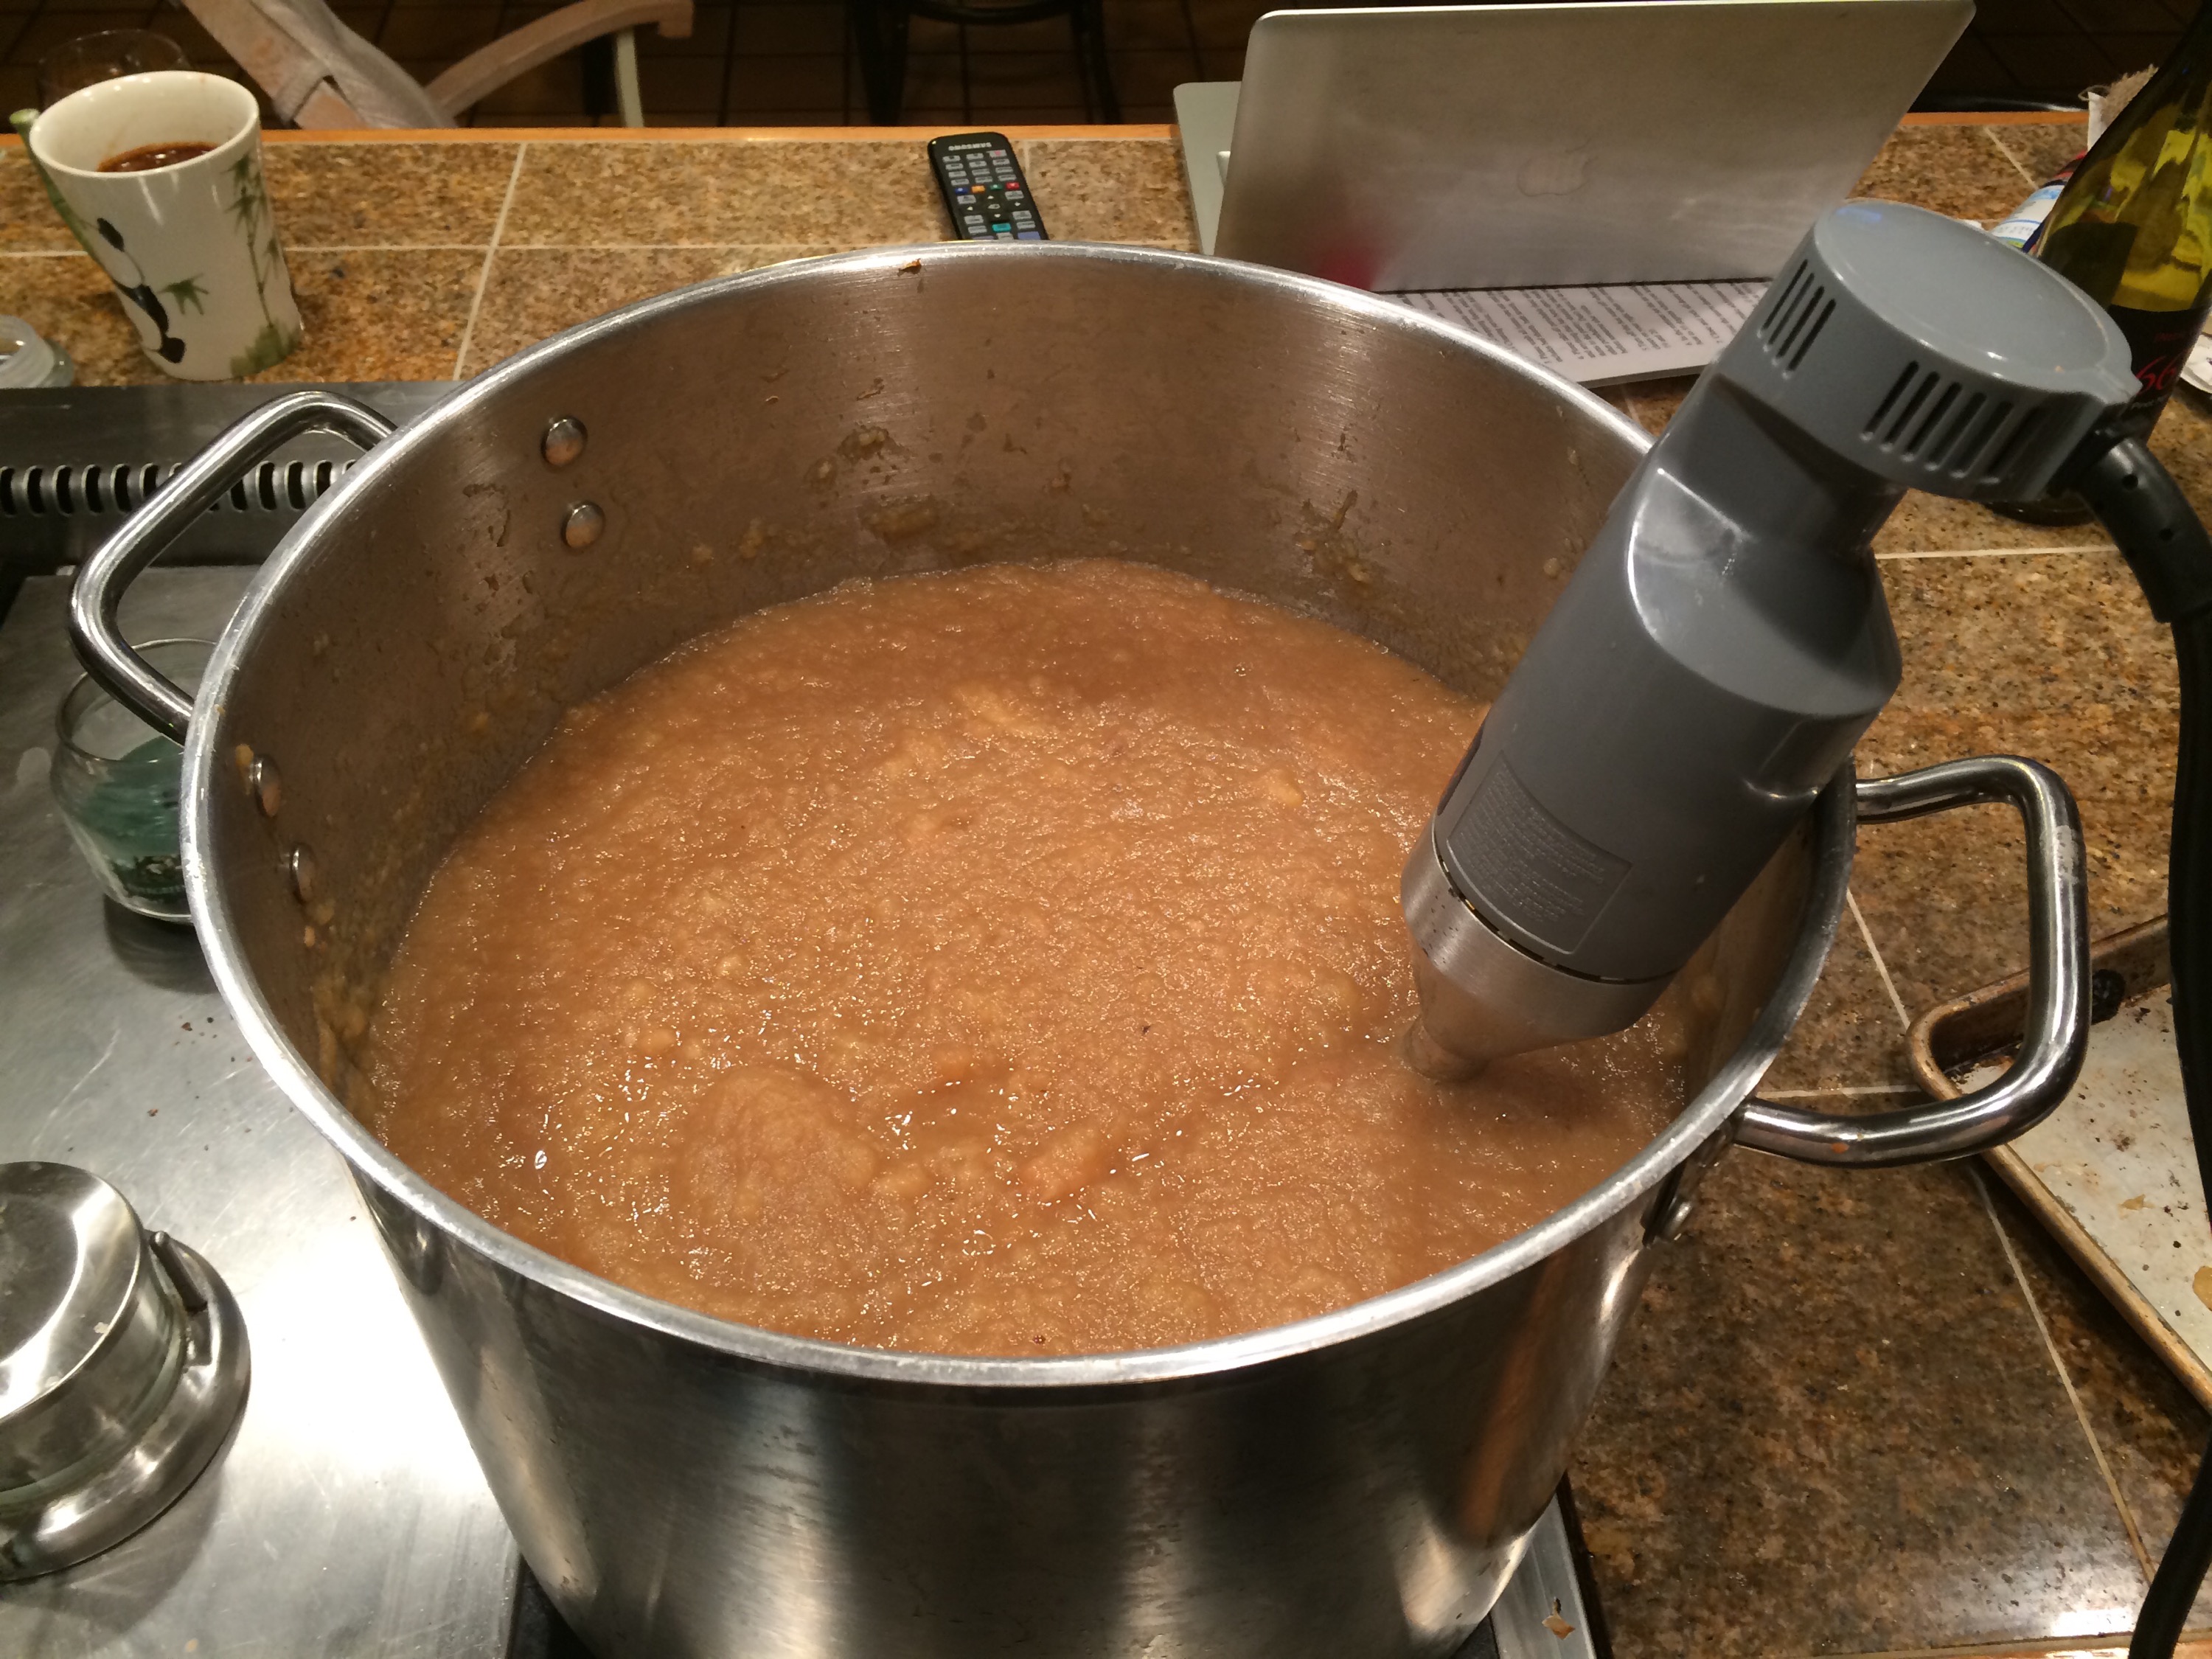 Applesauce, just made on the stove. 